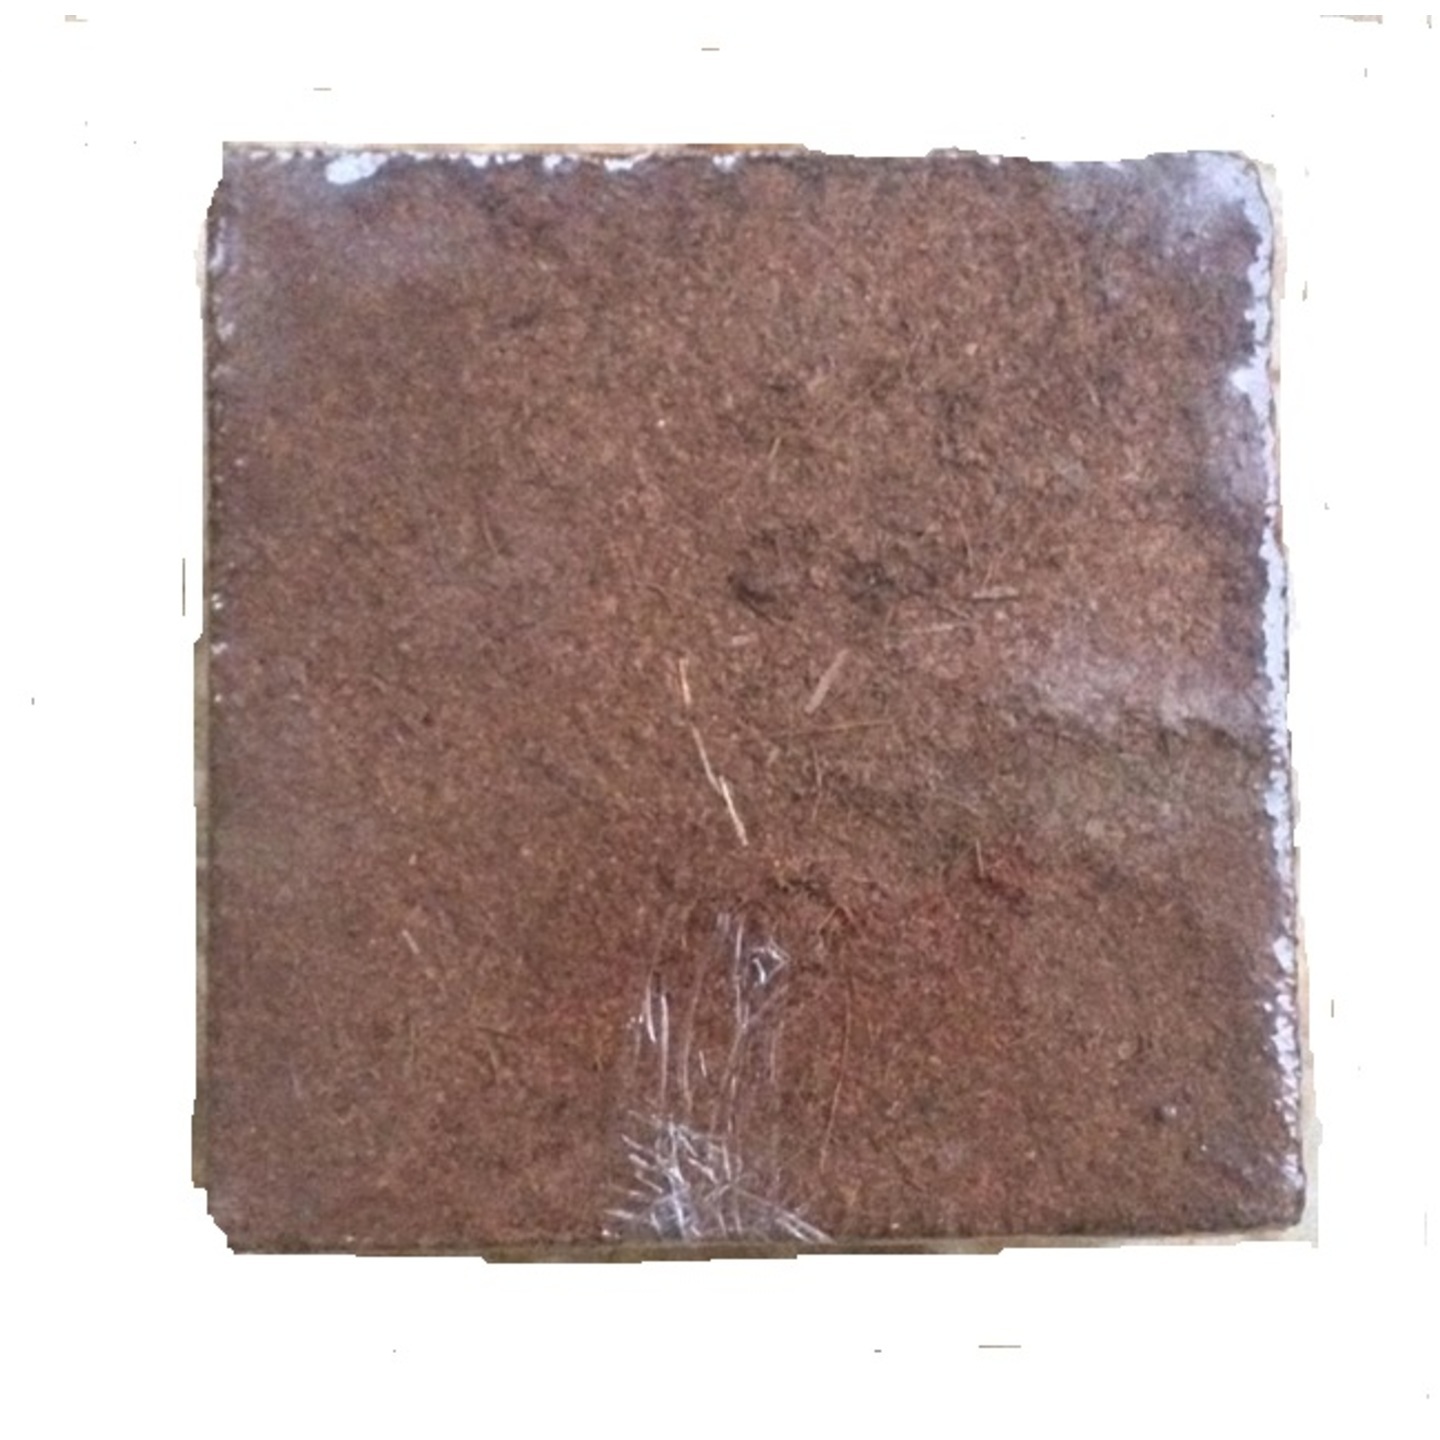 MyHobbyGarden-Cocopeat-compressed block-5 Kg-Expands to roughly 25 litres of media